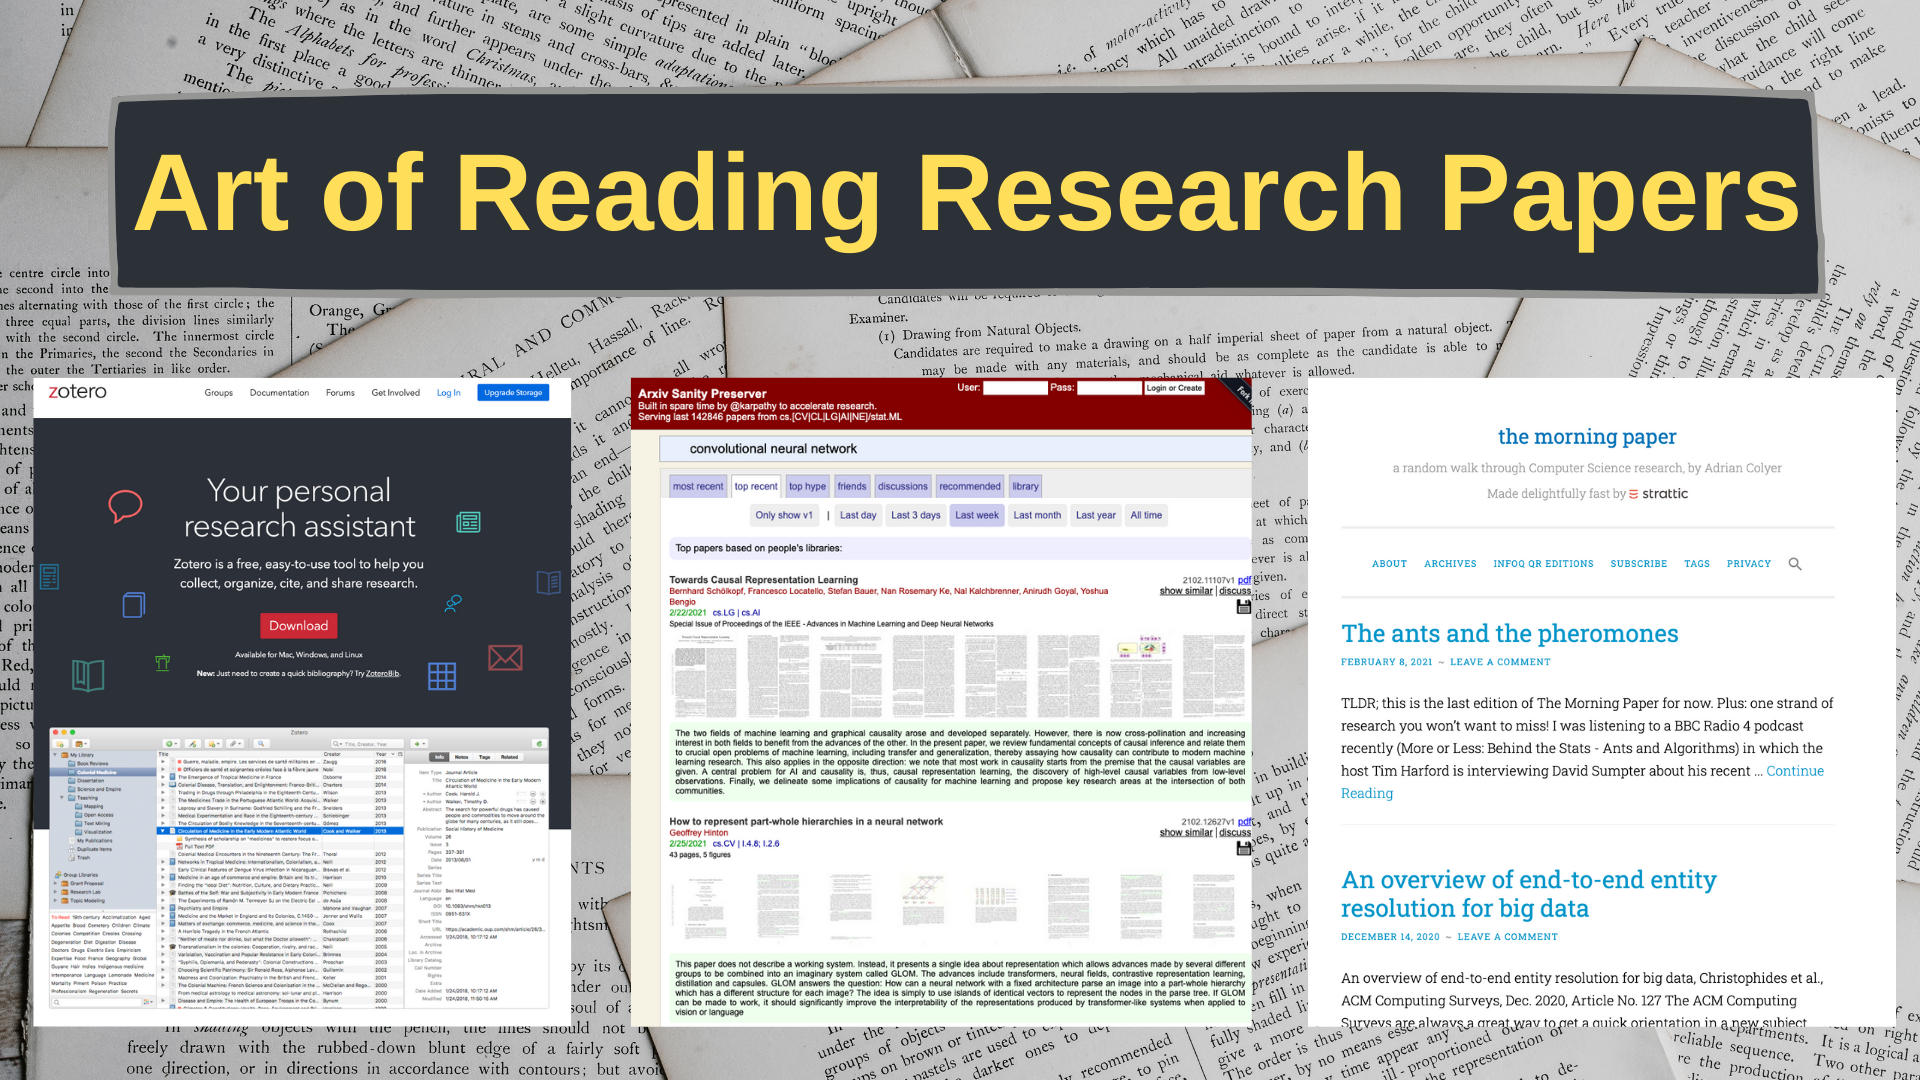 How to Read a Research Paper – A Guide to Setting Research Goals, Finding Papers to Read, and More